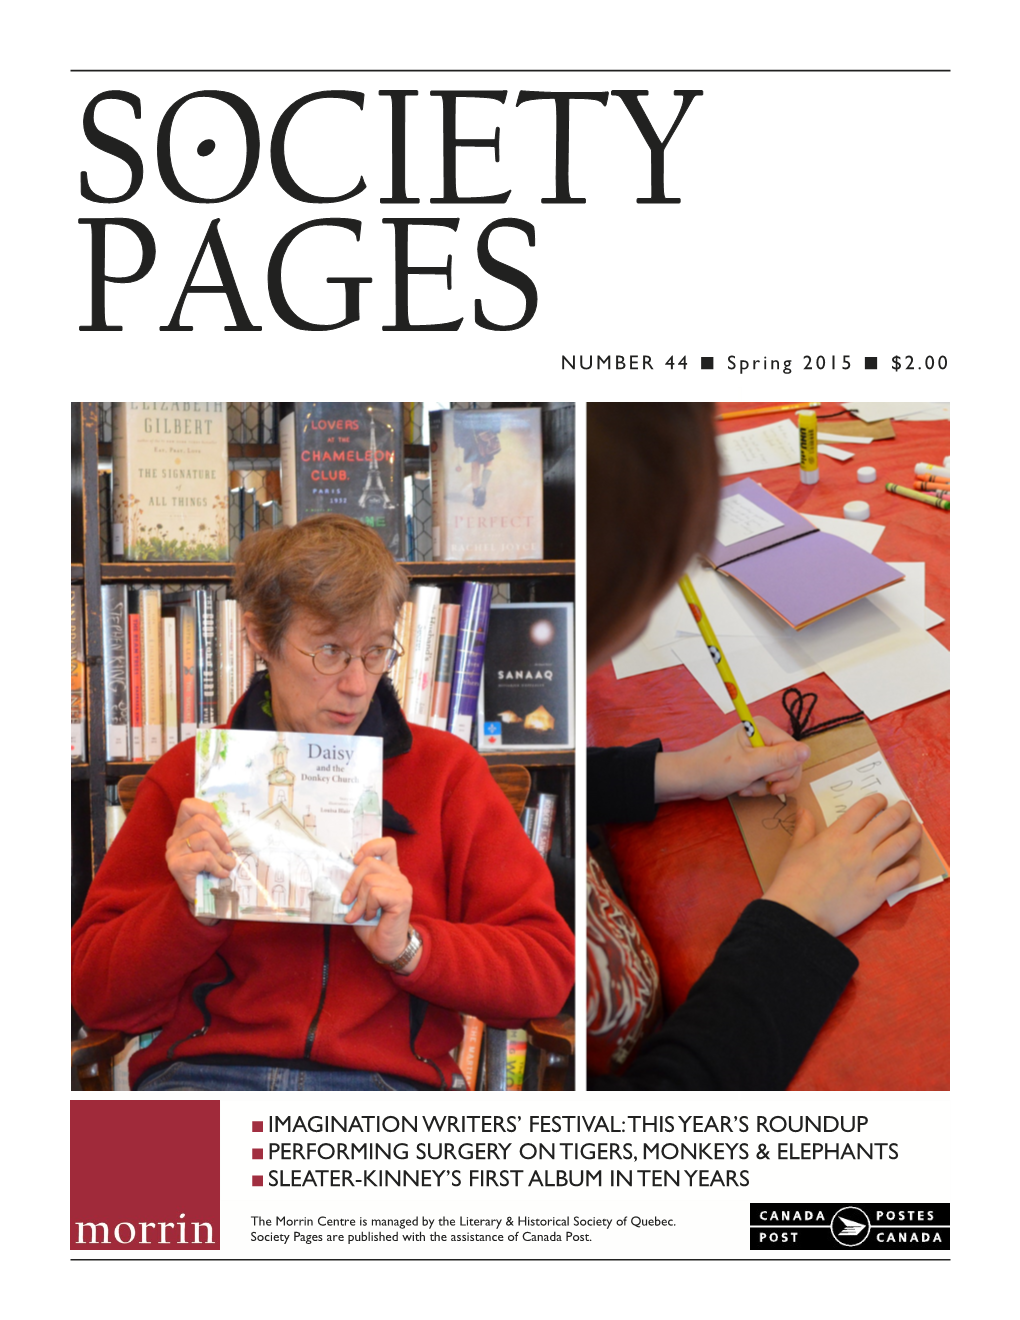 Society Pages Are Published with the Assistance of Canada Post